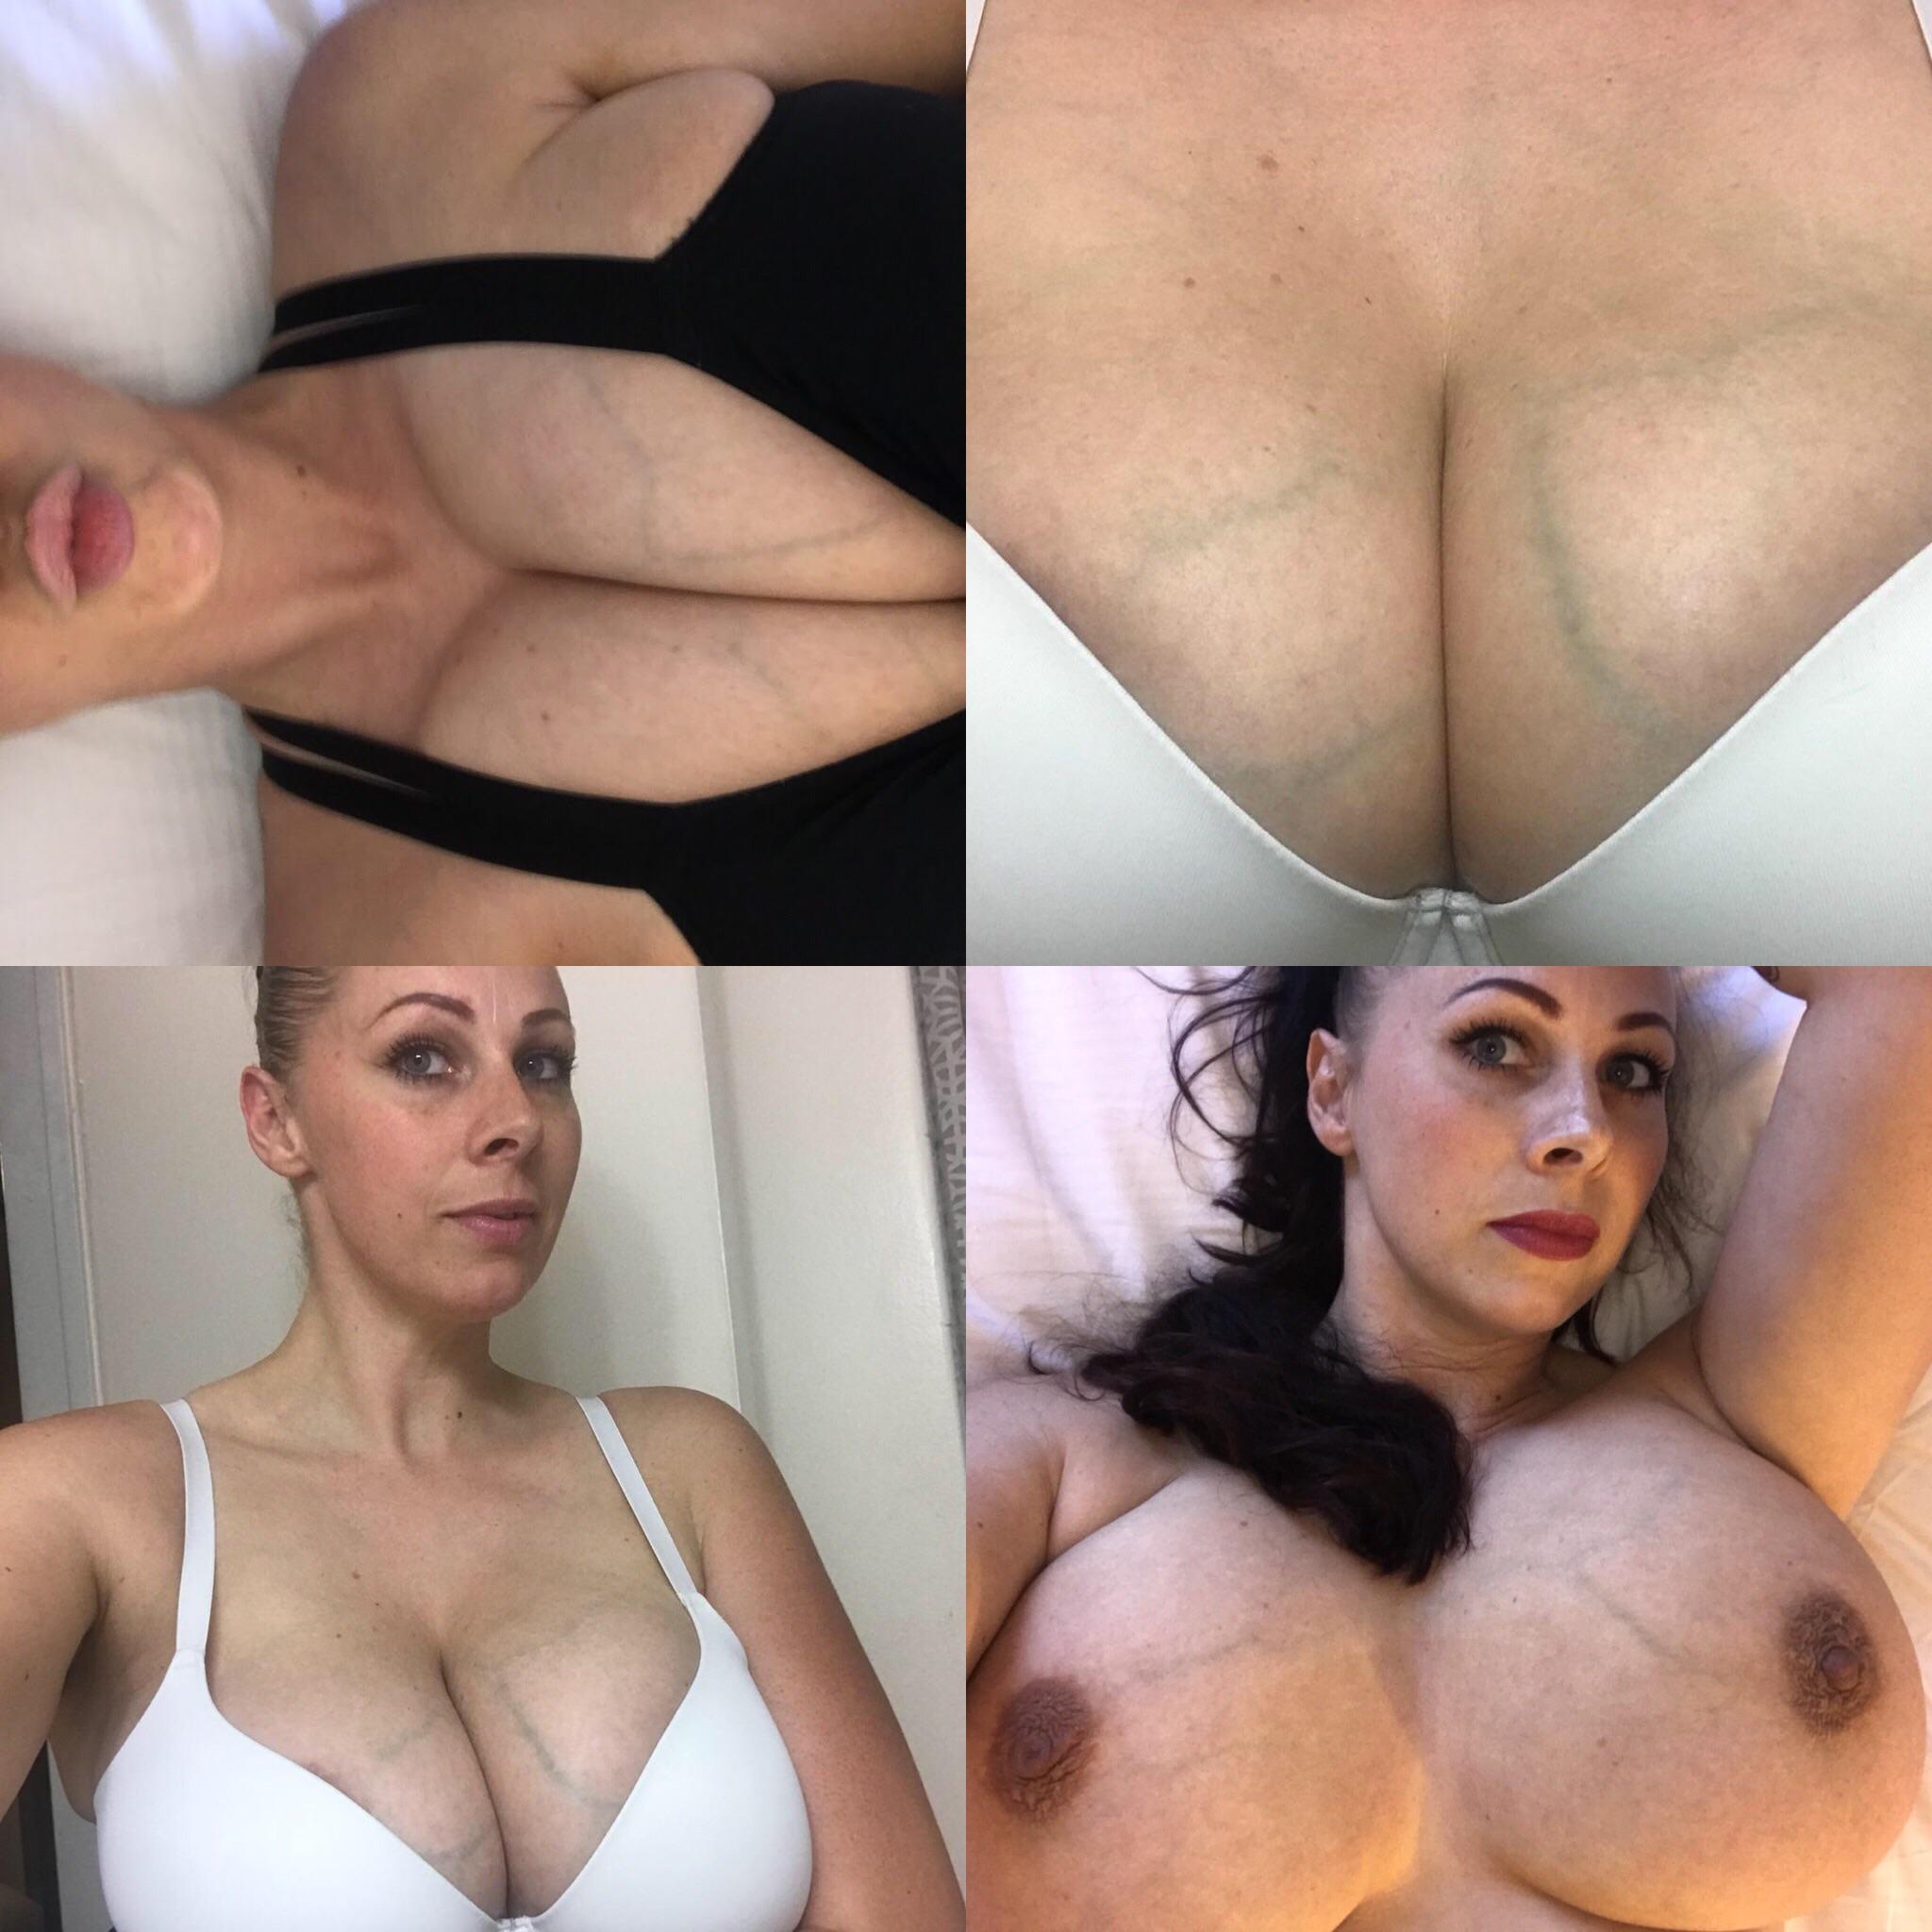 When think gianna michaels